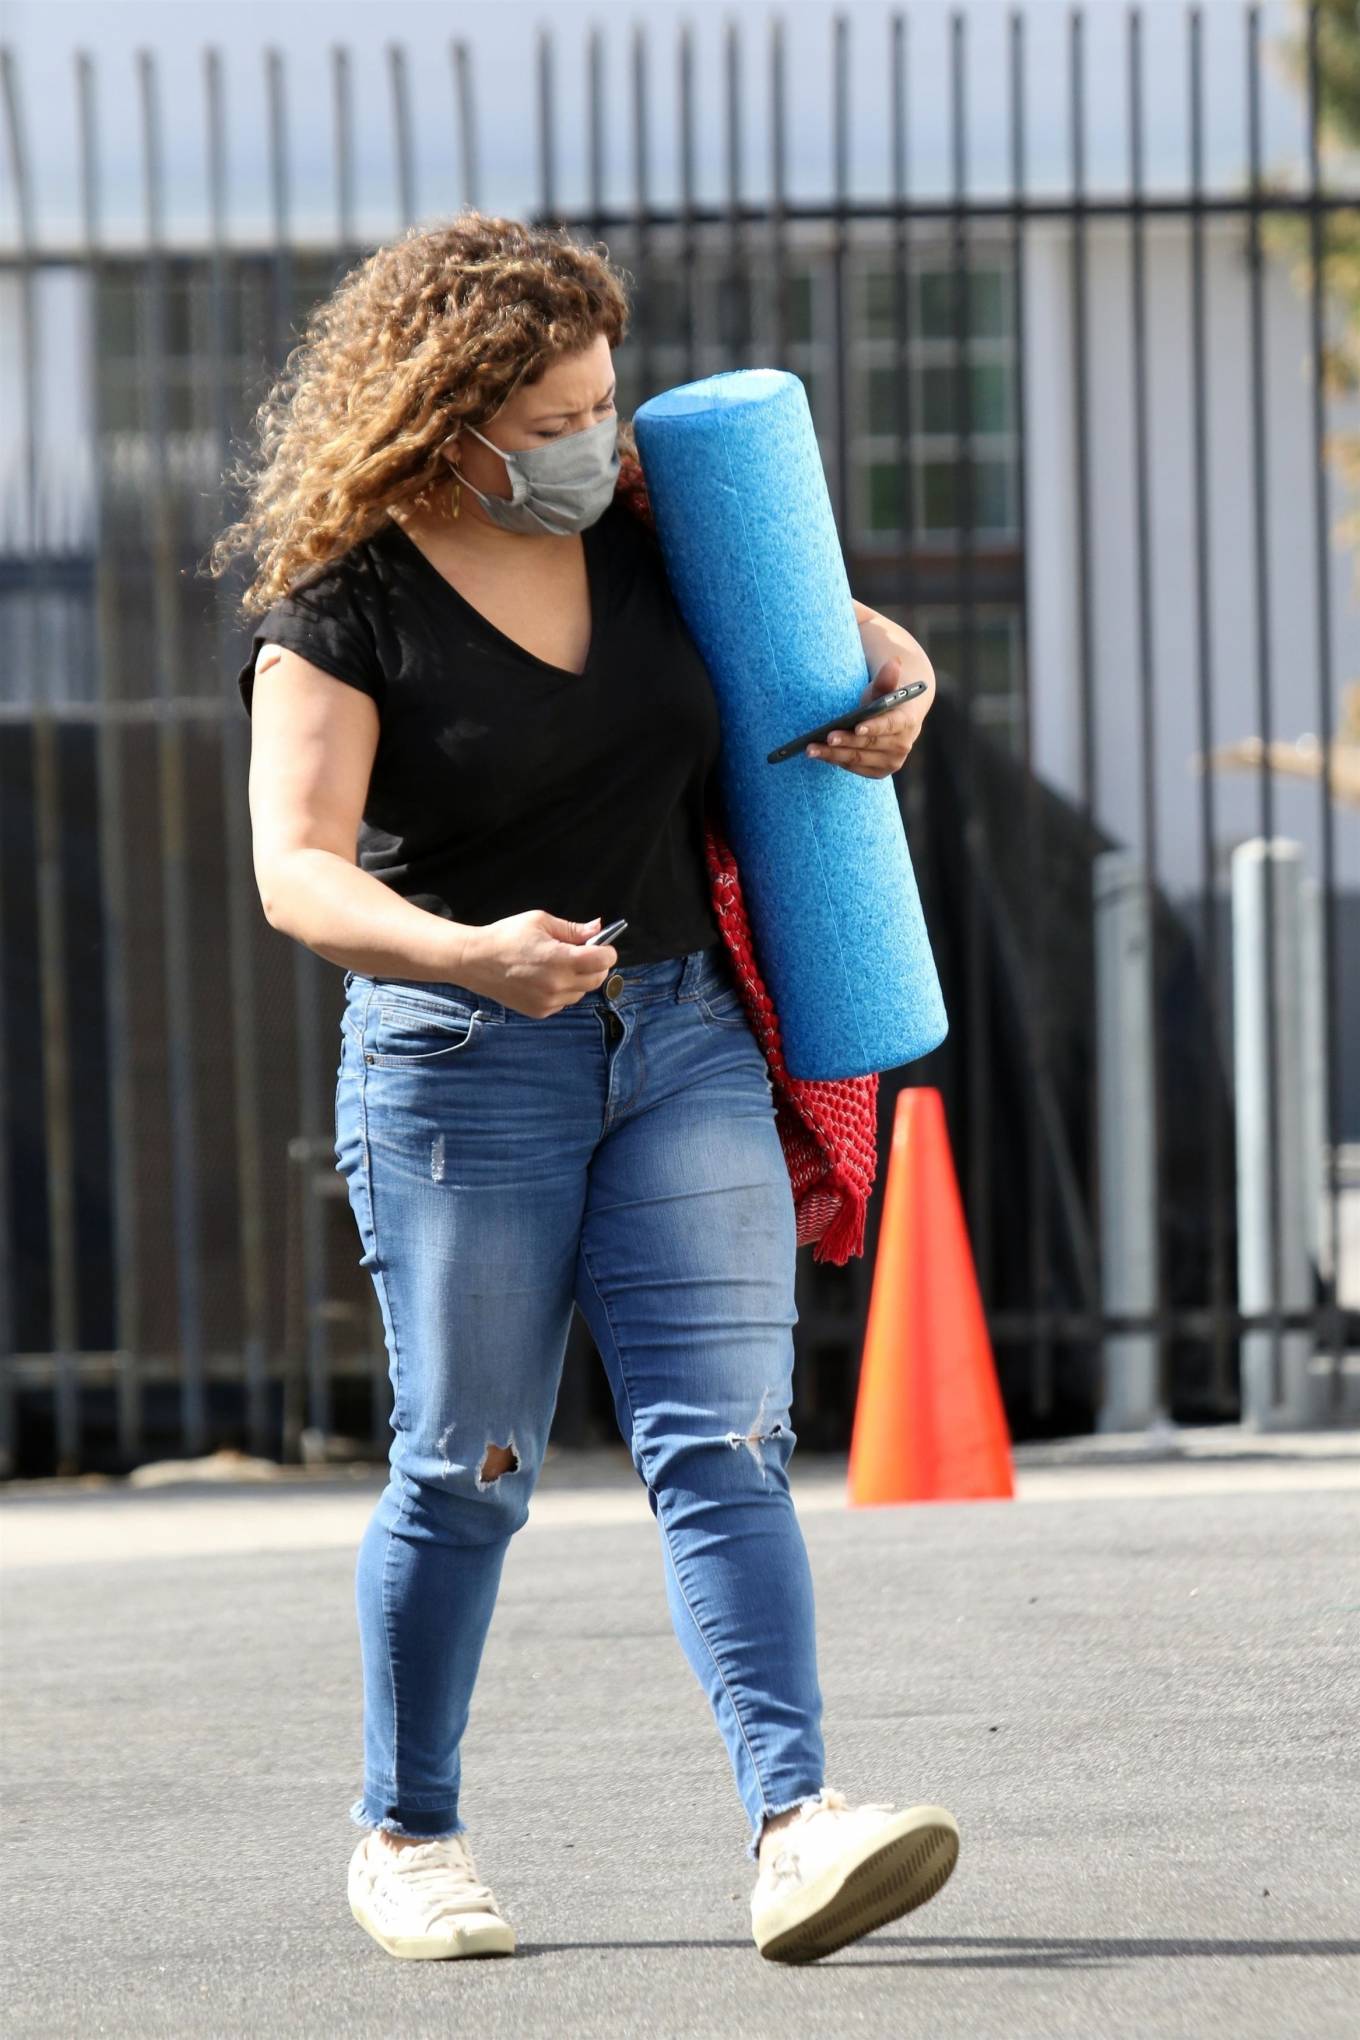 Justina Machado - Heads into the DWTS studio in Los Angeles